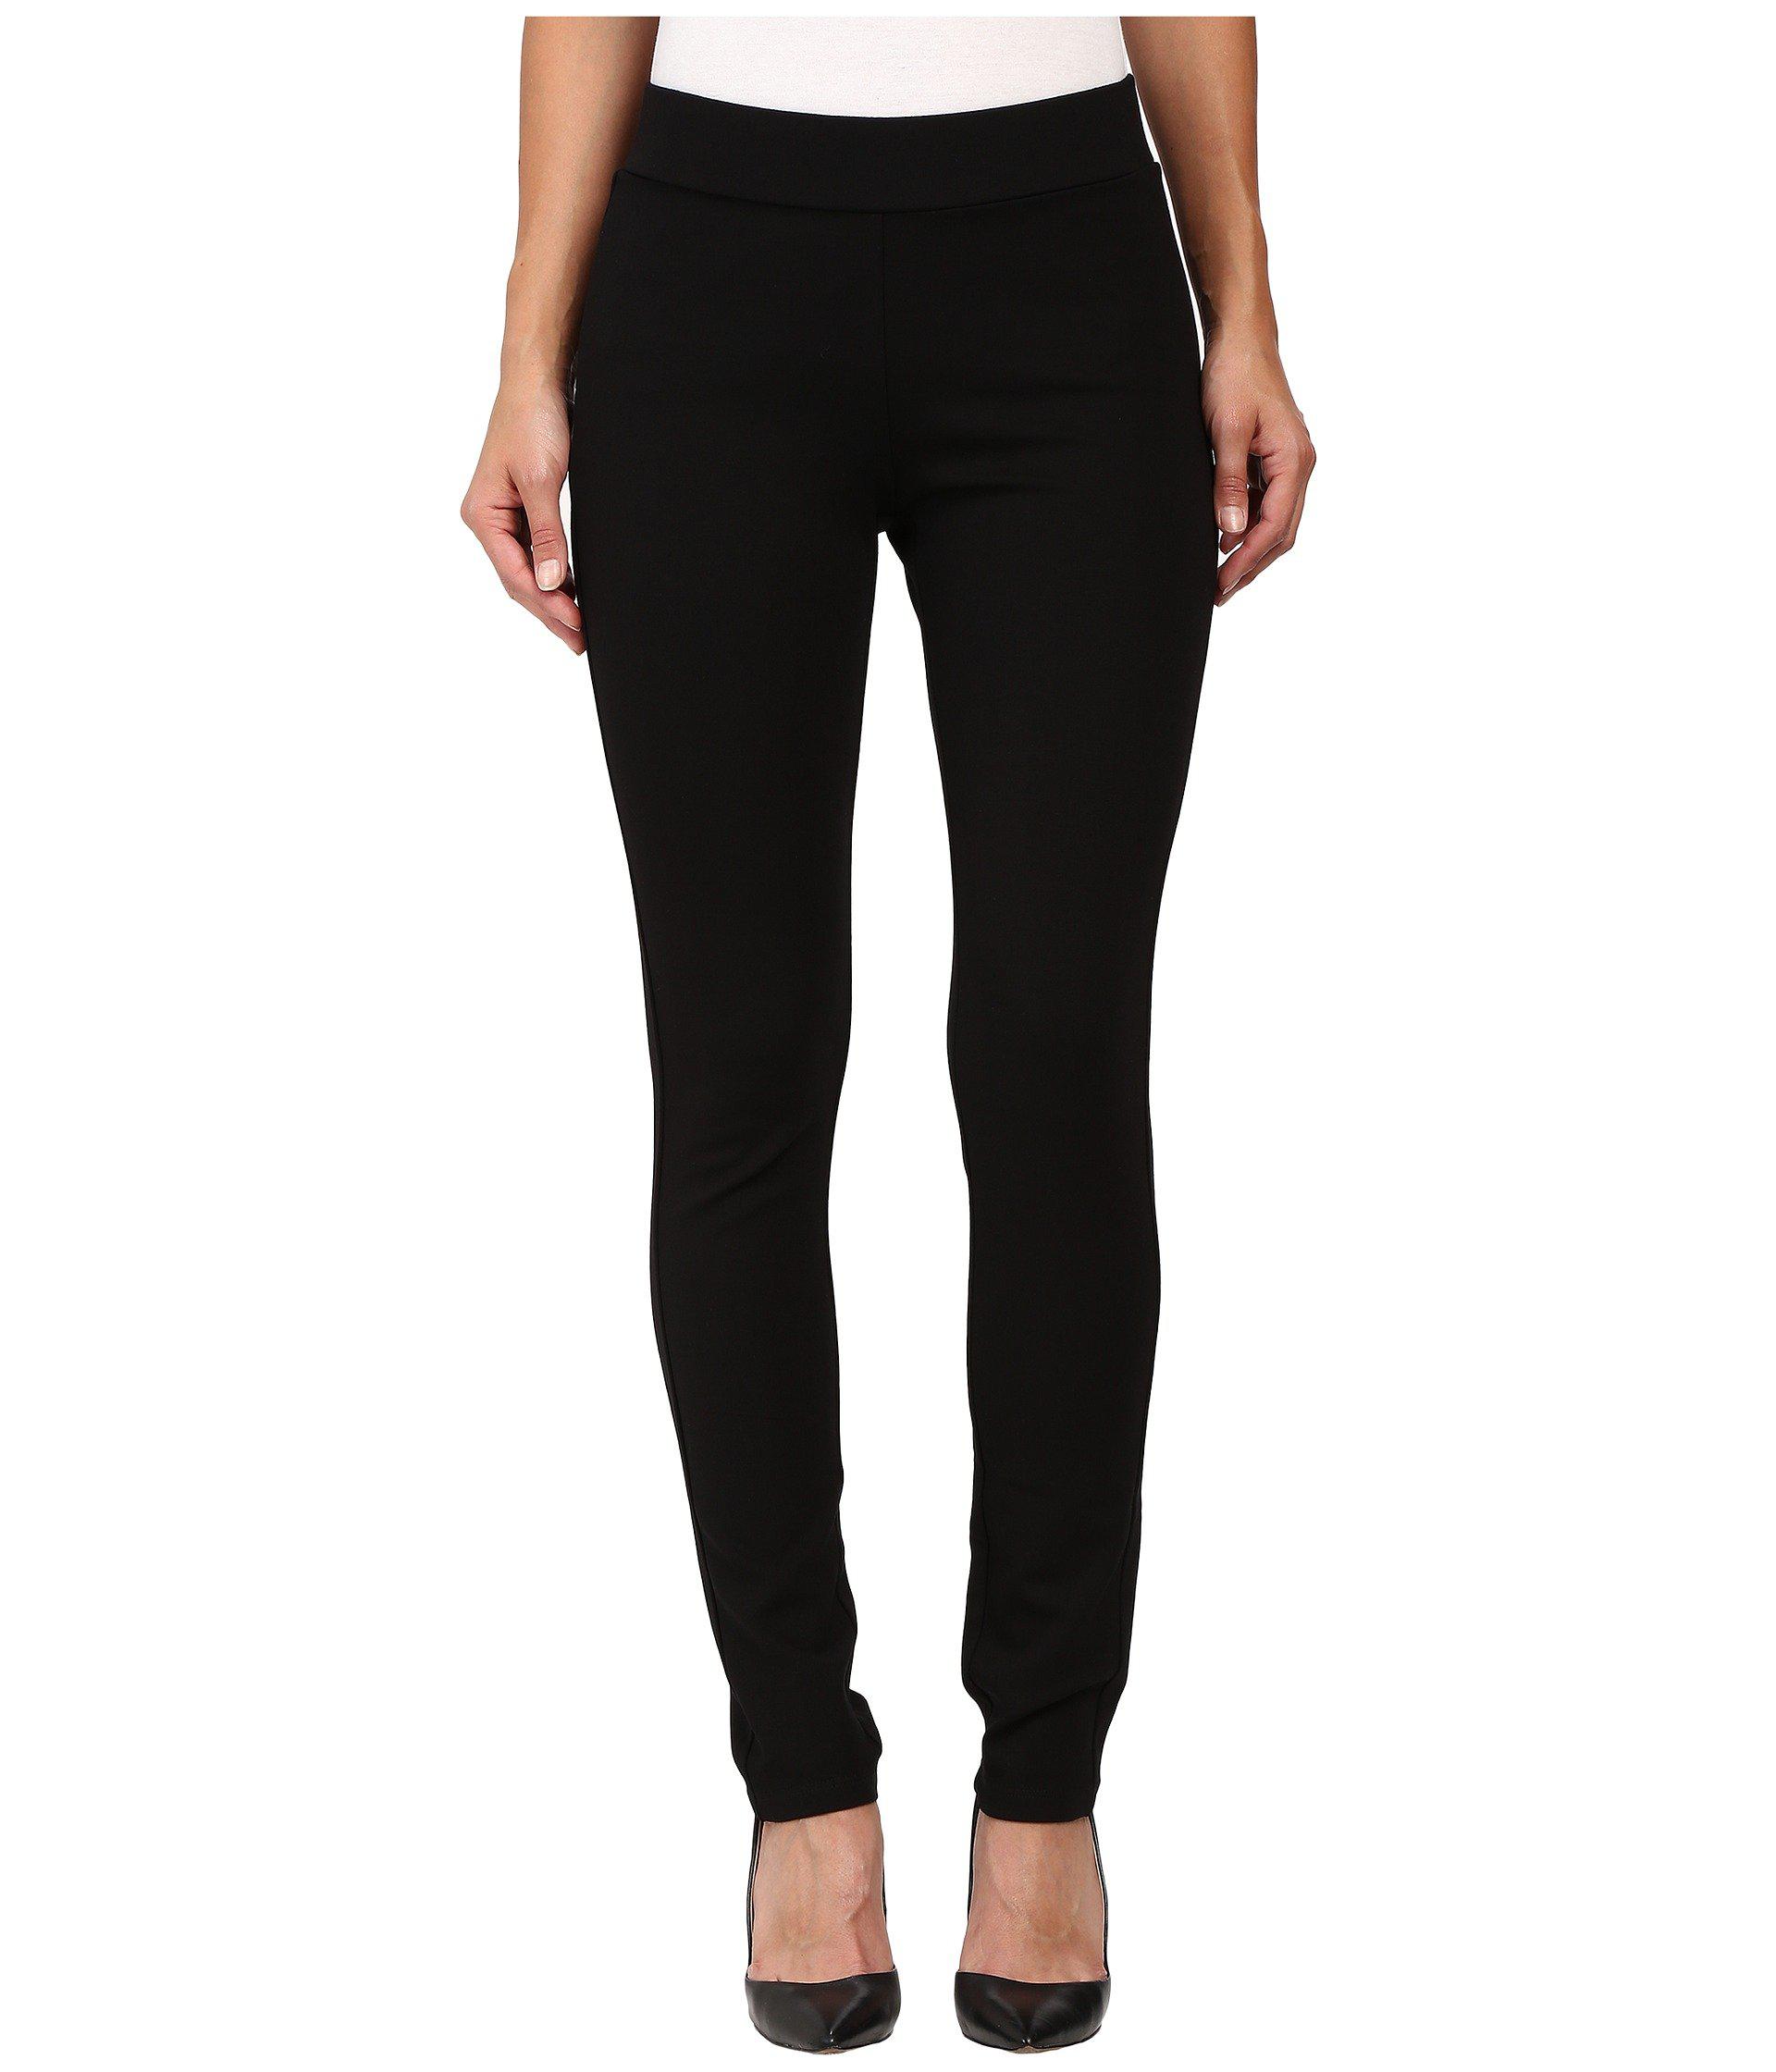 NYDJ Synthetic Jodie Pull-on Ponte Knit Legging in Black - Lyst